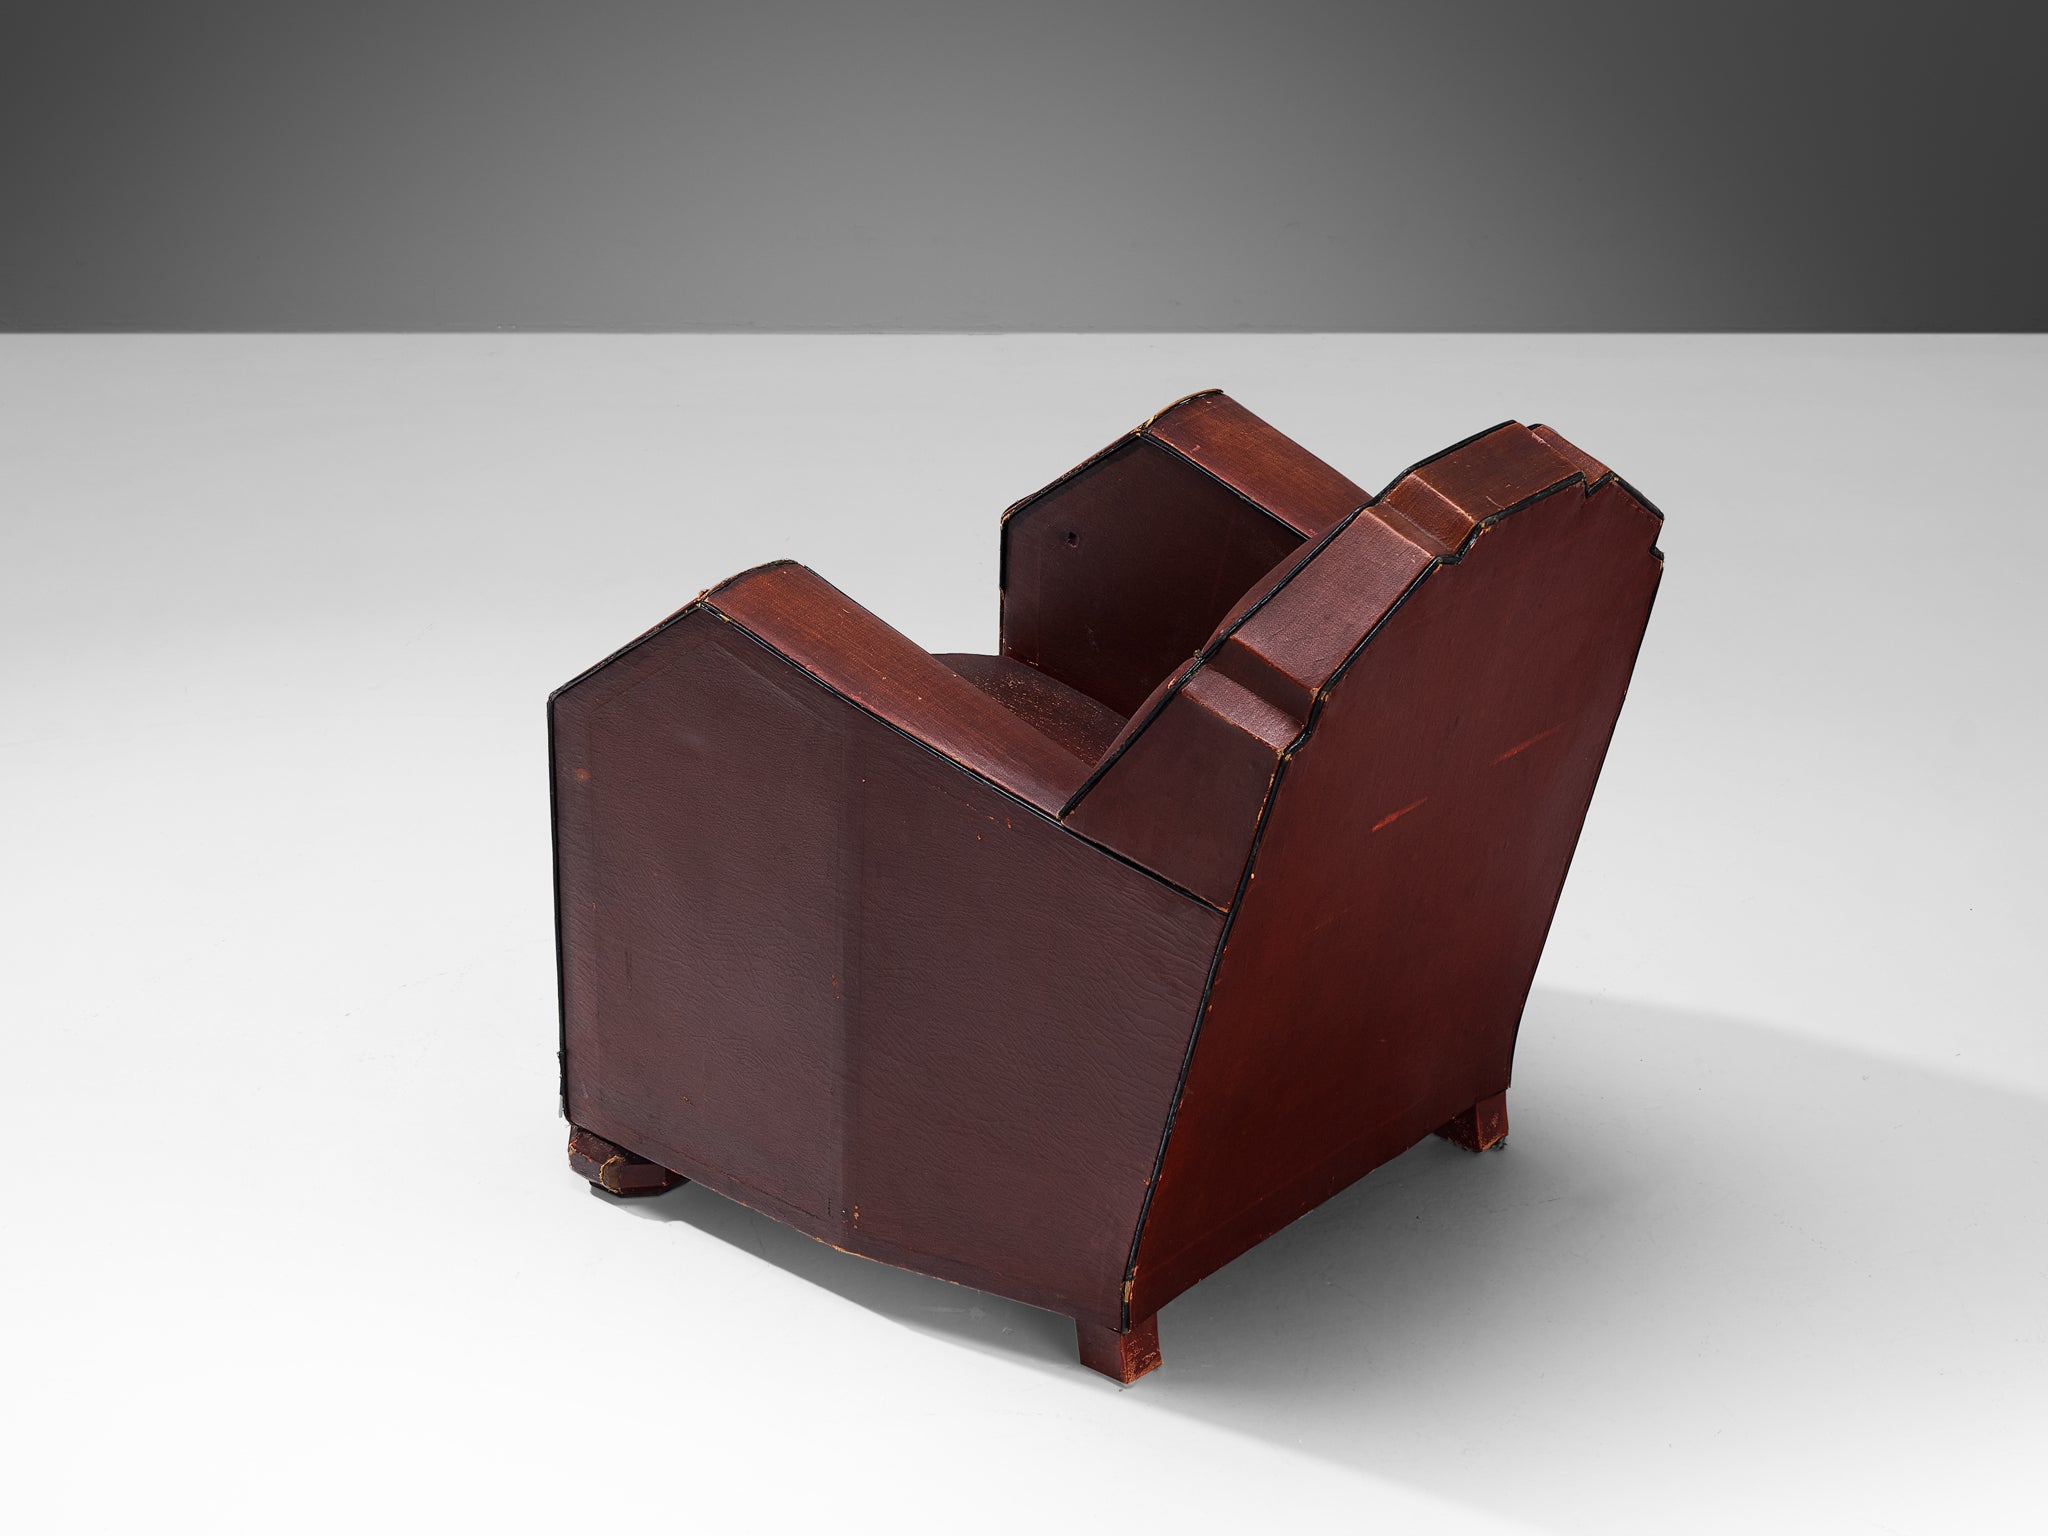 French Art Deco Club Chair in Burgundy Leather